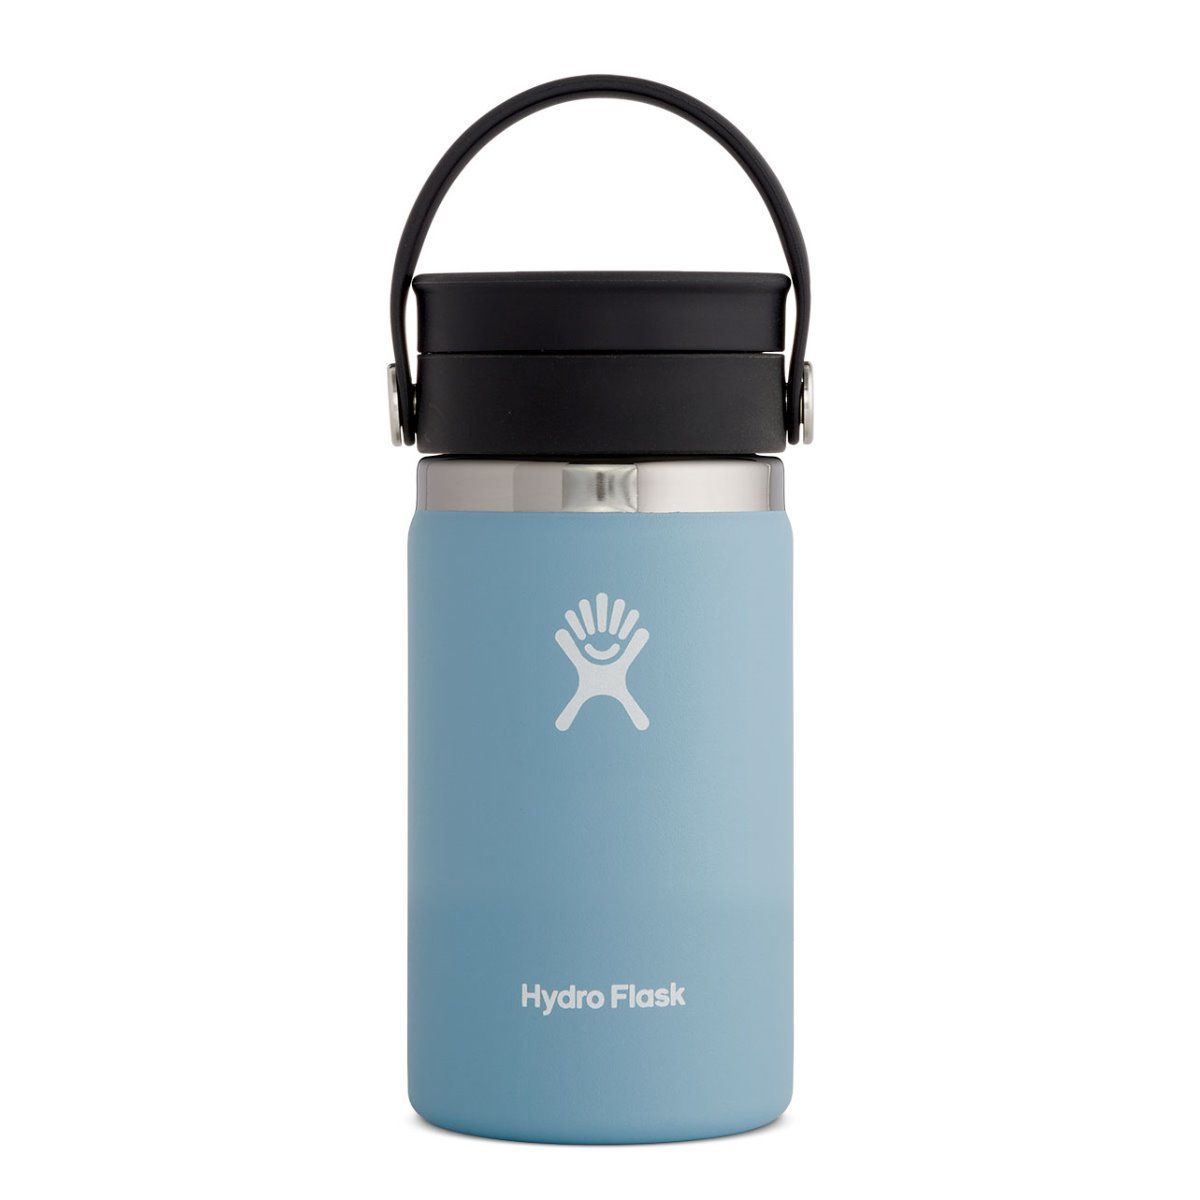 Hydro Flask - 12oz. Vacuum Insulated Stainless Steel Sip Lid Coffee Flask All Things Being Eco Chilliwack Rain